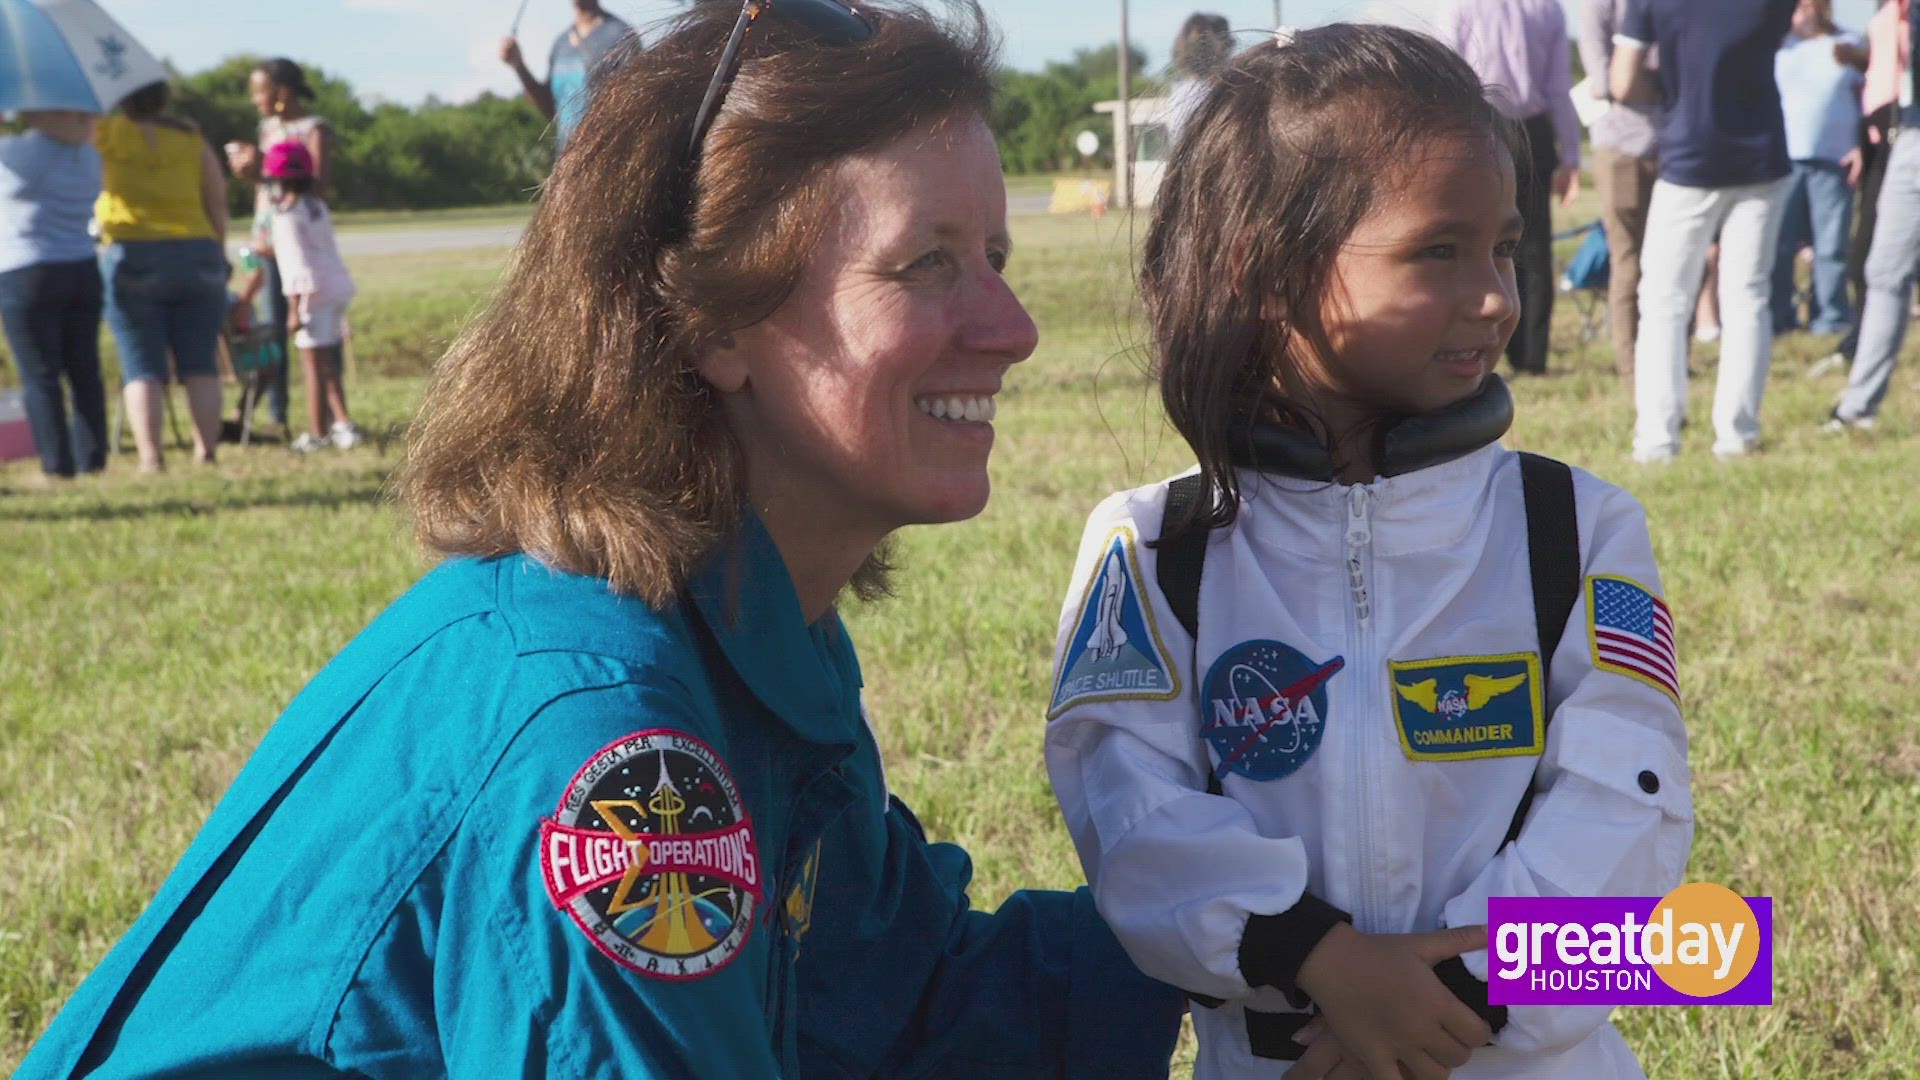 Learn more about Dr. Shannon Walker and how she is impacting our youth to reach for the stars.